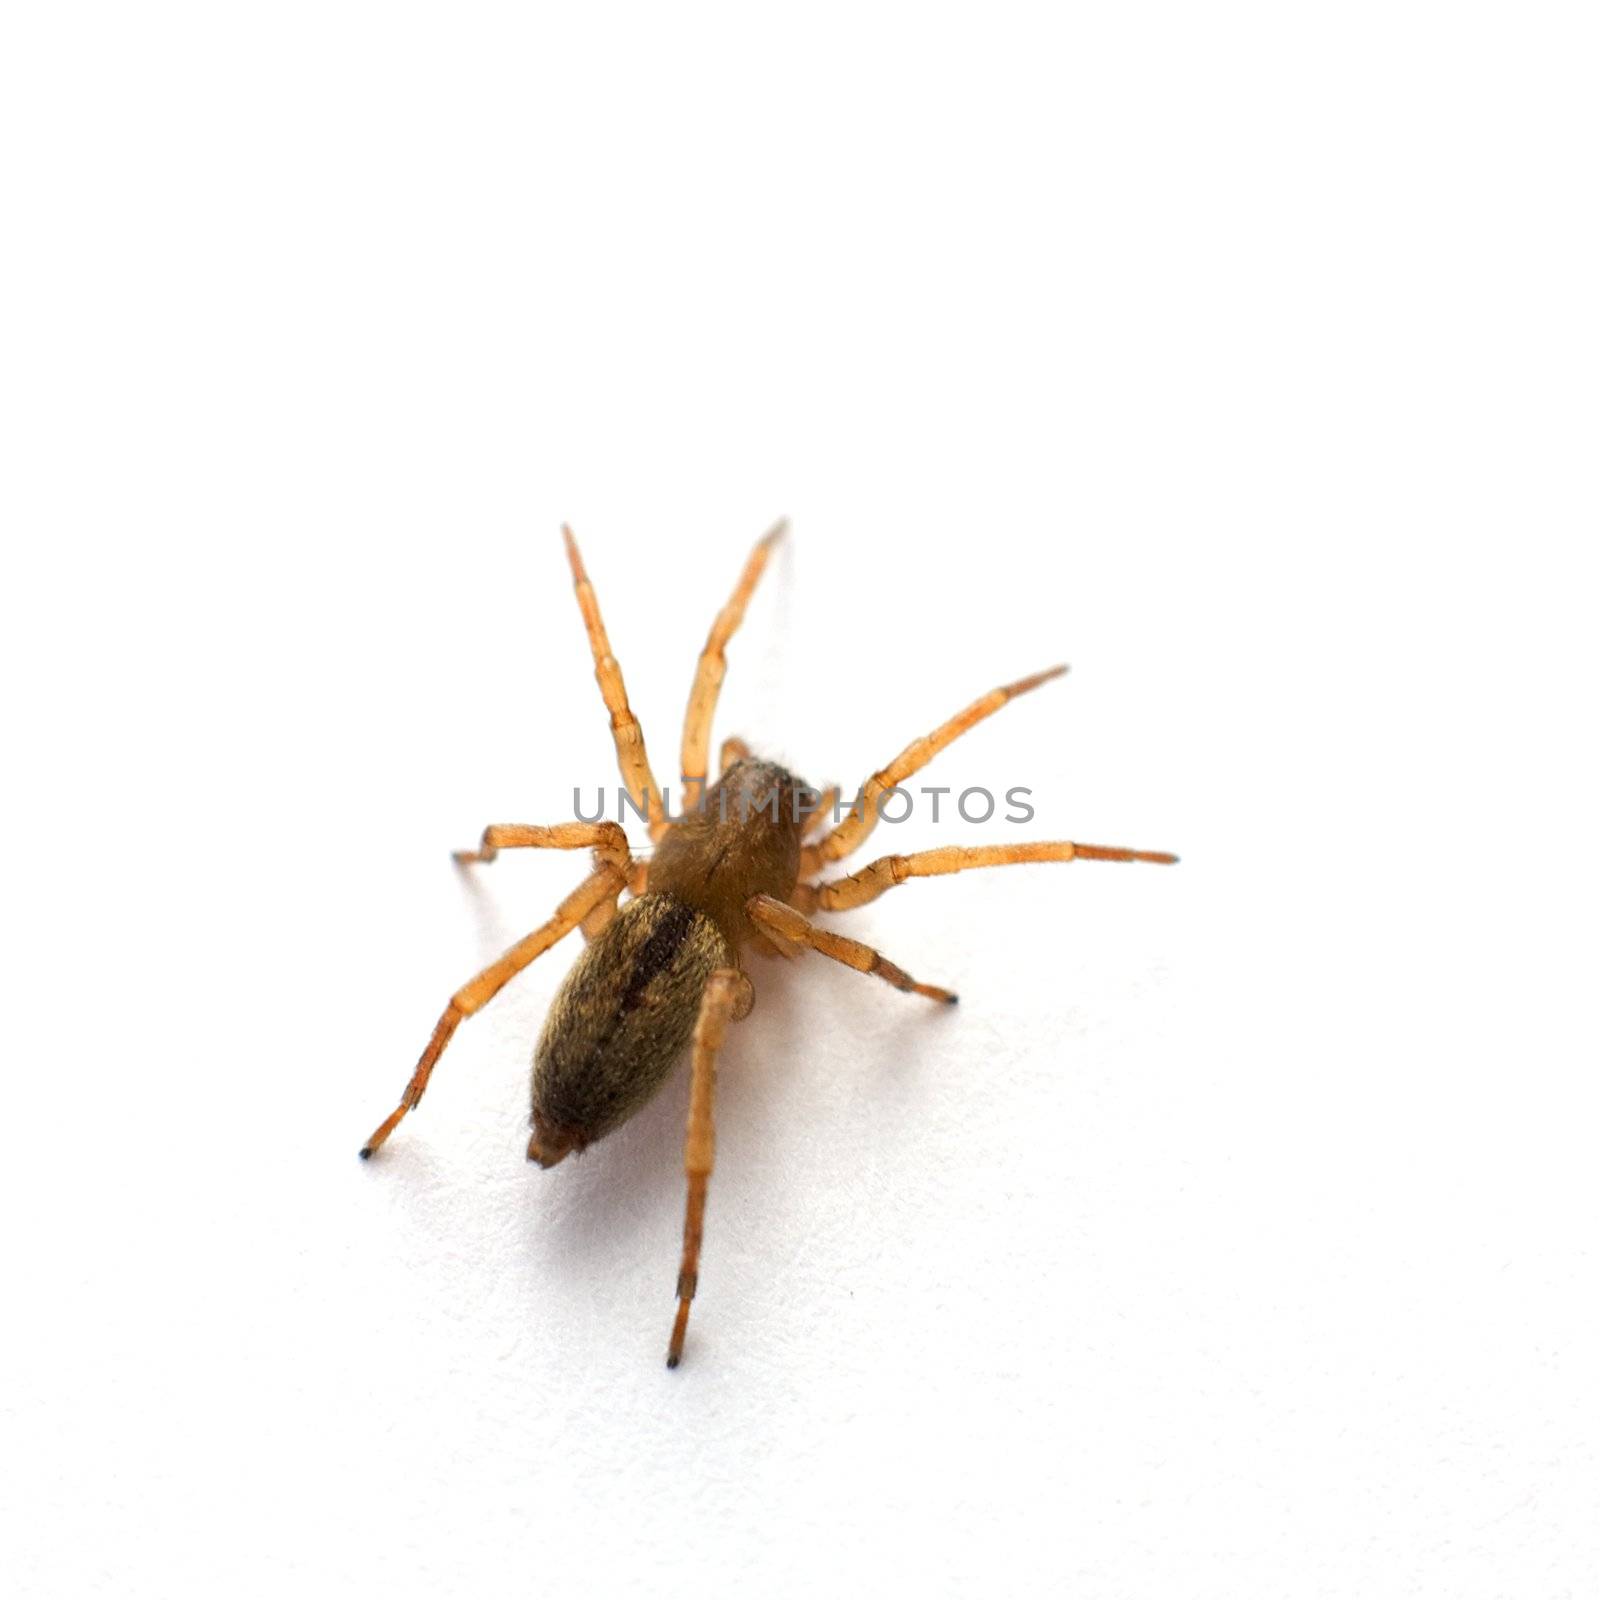 Brown spider photographed on a white background